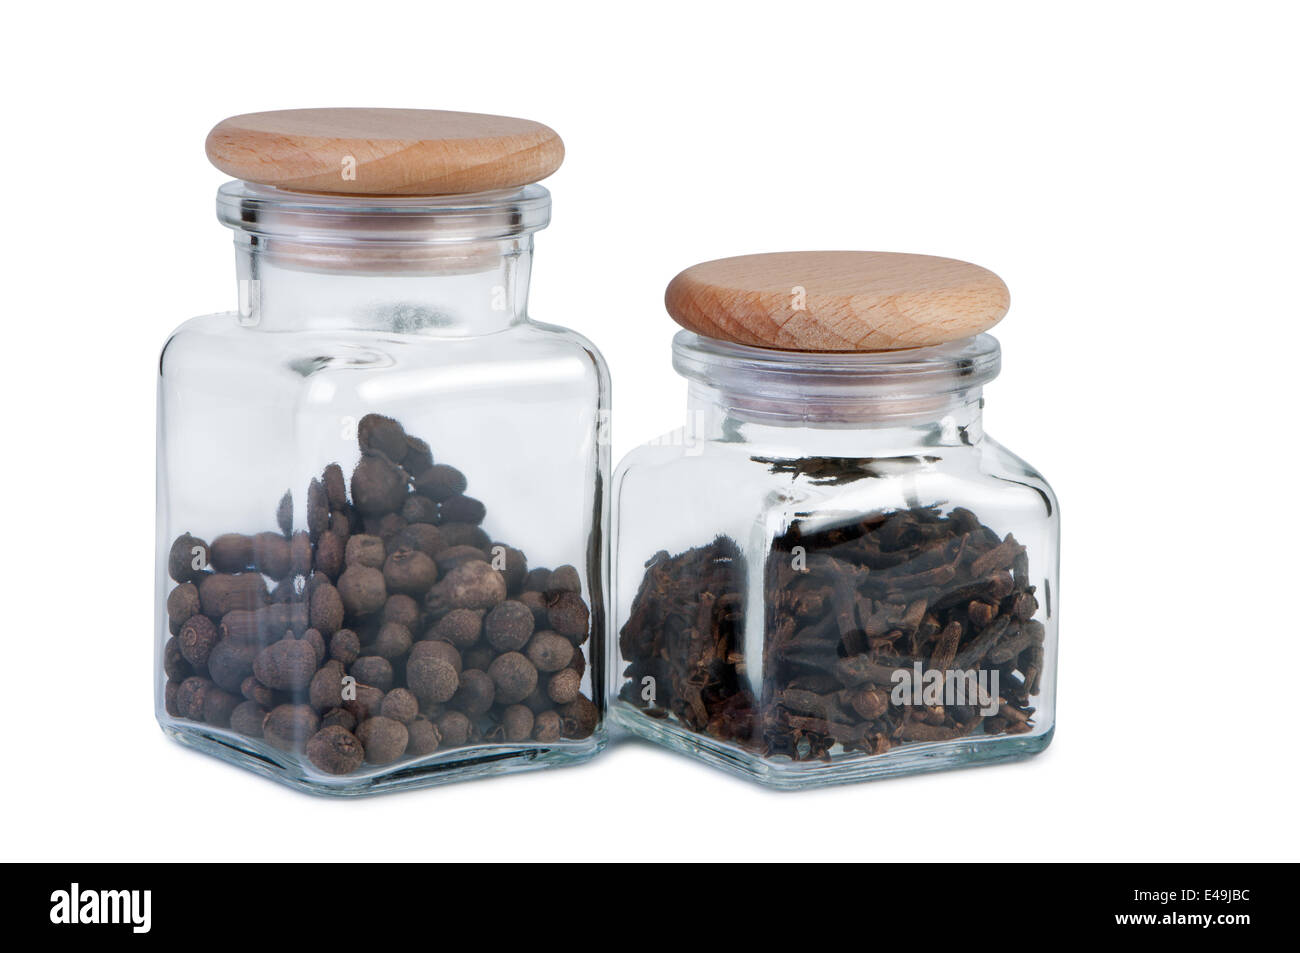 Jars of spices on a white background Stock Photo